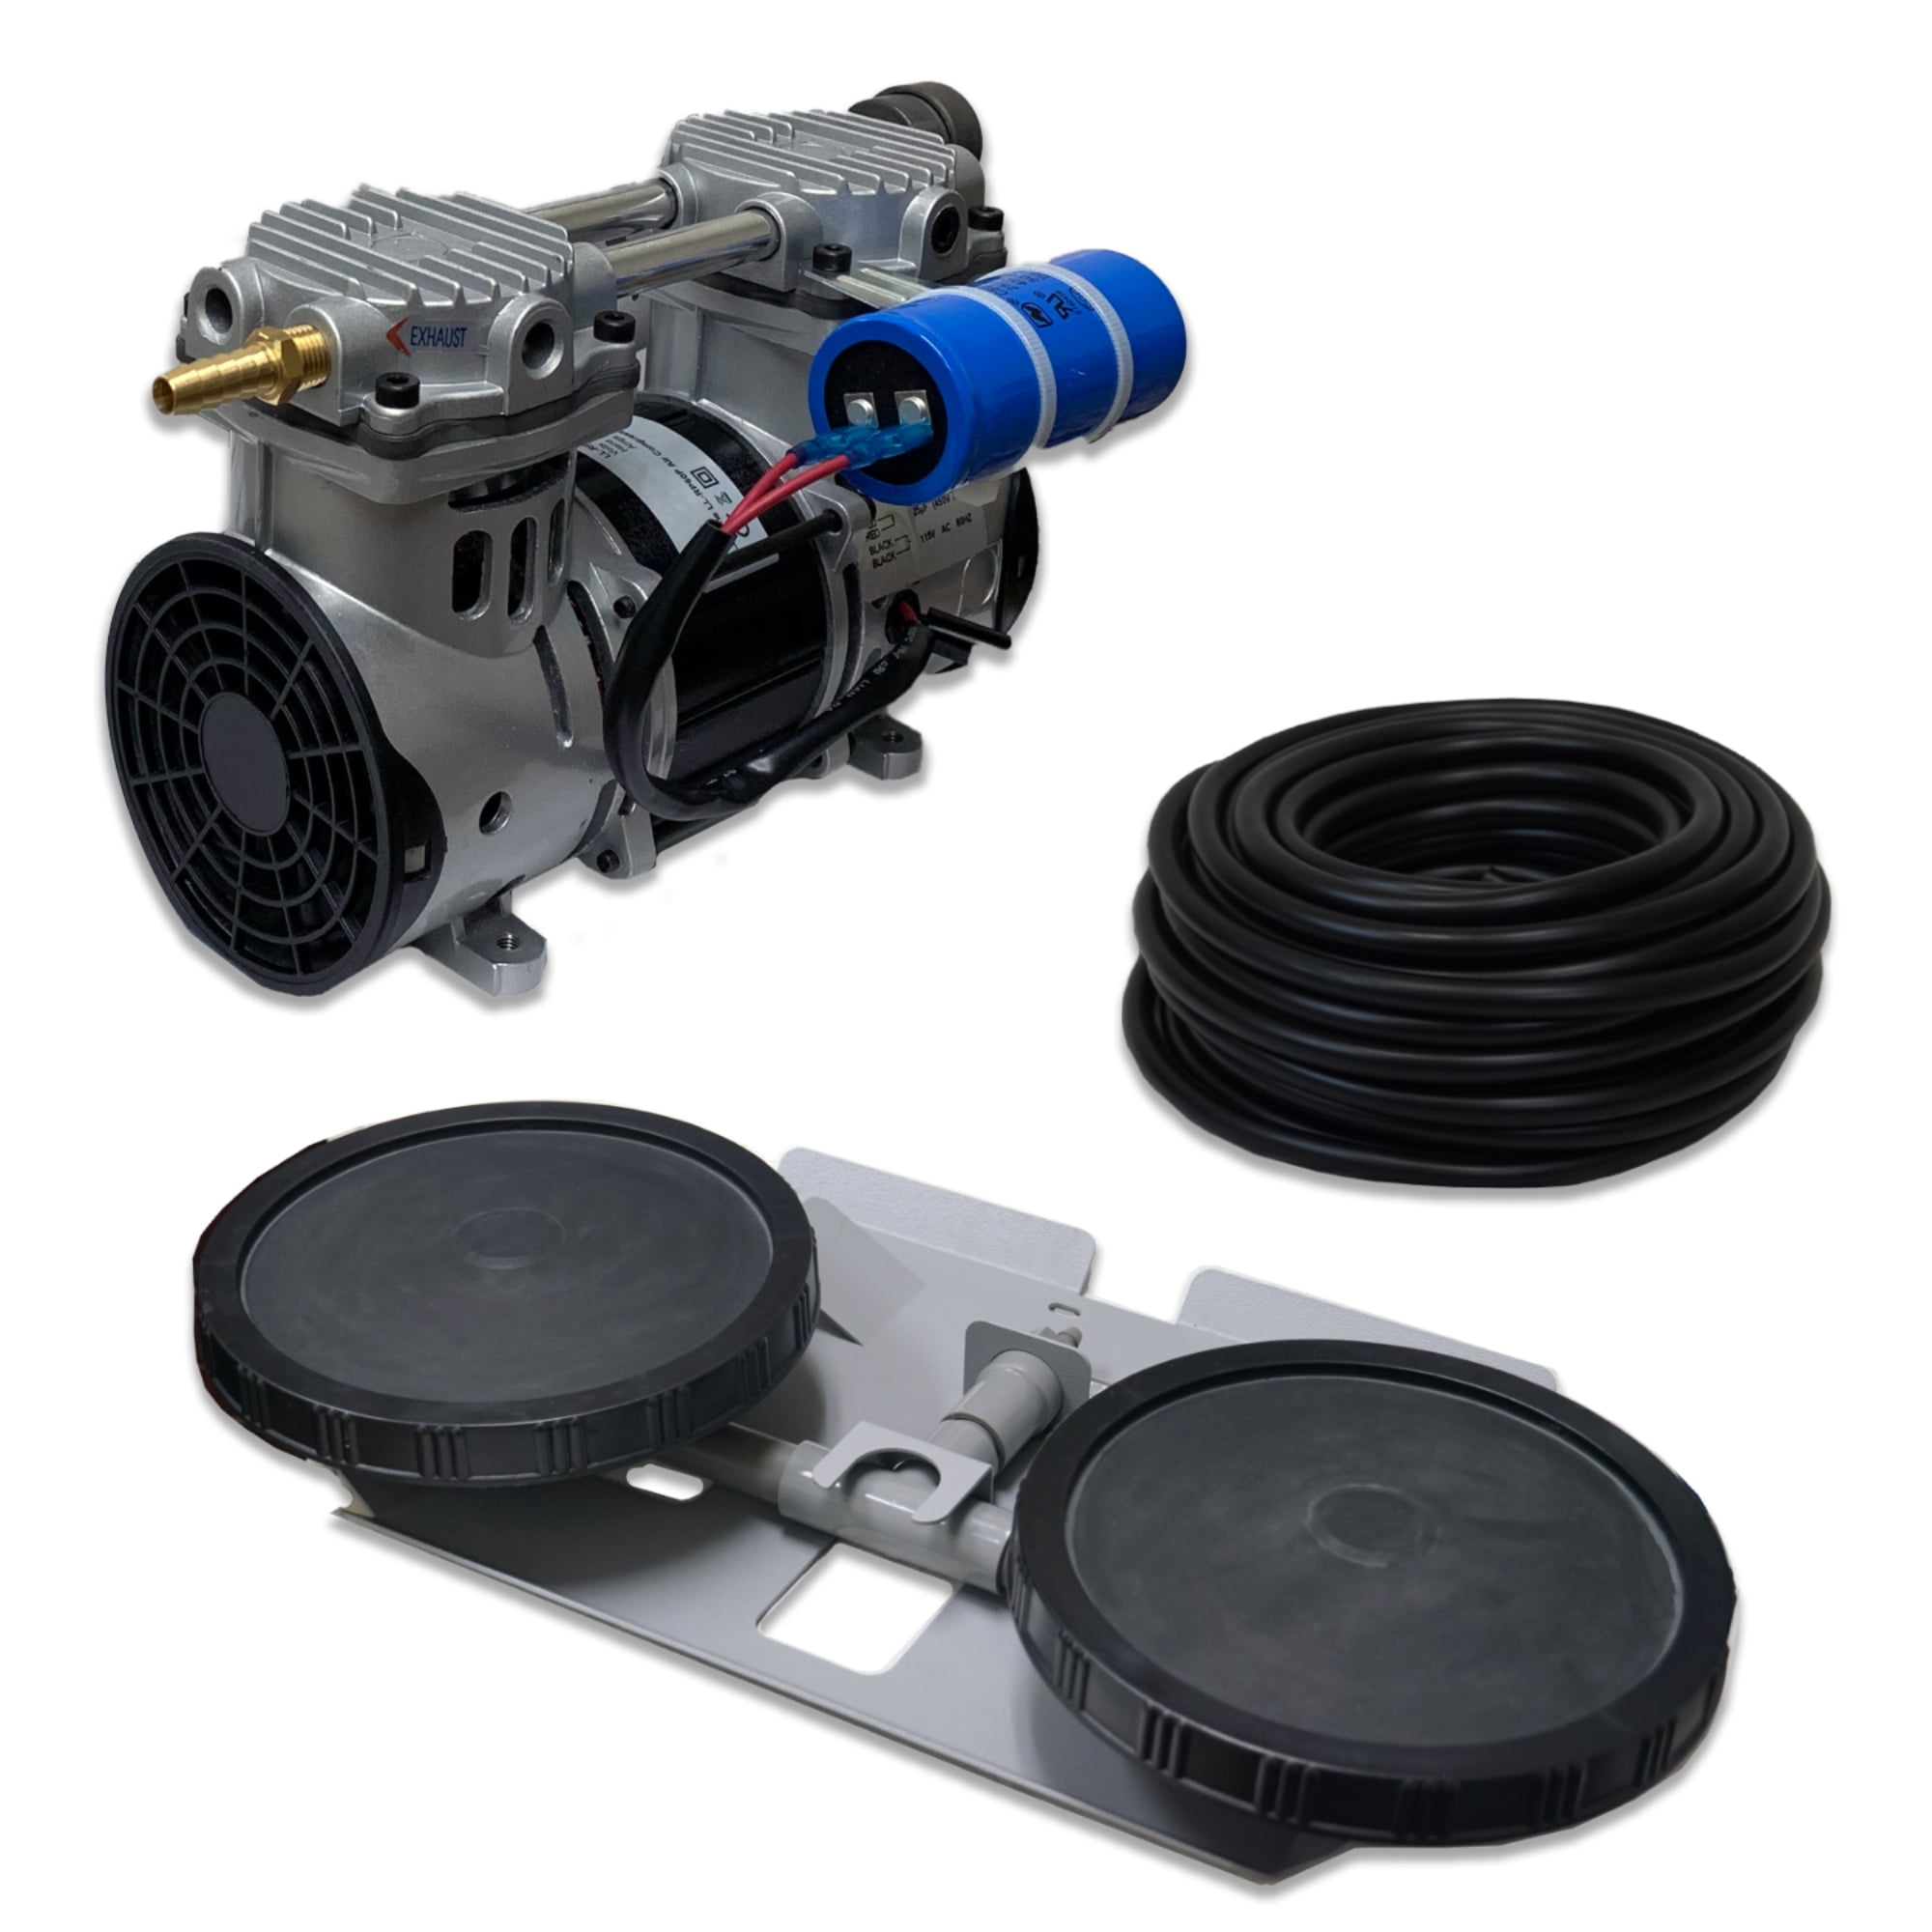 HALF OFF PONDS Patriot Pond Pro 3.9 Cubic Feet per Minute Deep Water Subsurface Air & Aeration Rocking Piston Air Compressor for Deep Water Subsurface Aeration of Ponds and Lakes 